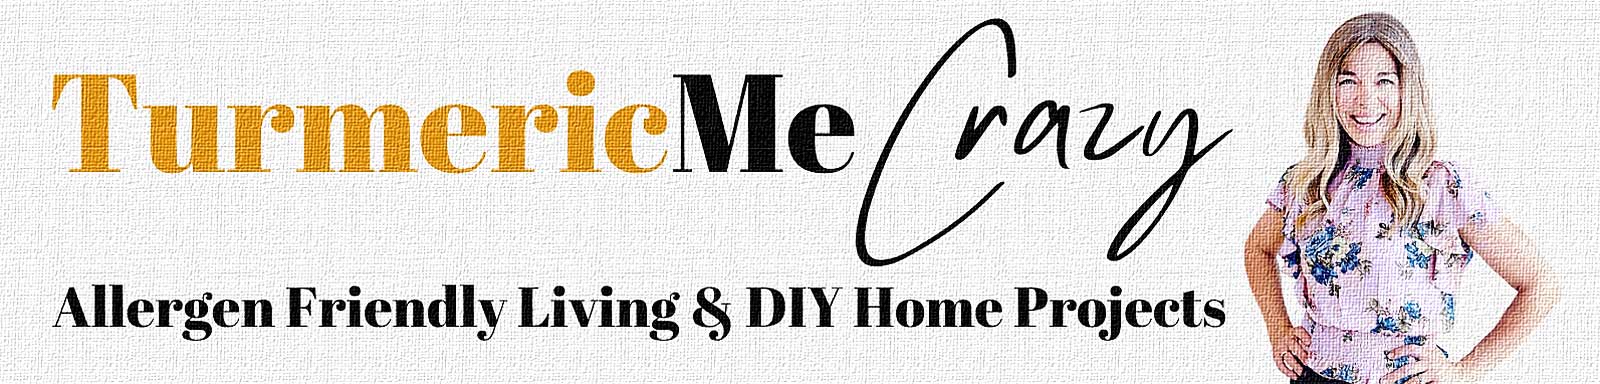 Healthy Recipes (free from gluten, egg, corn & additives with vegan options) and DIY home projects How "Turmeric it" Yourself!